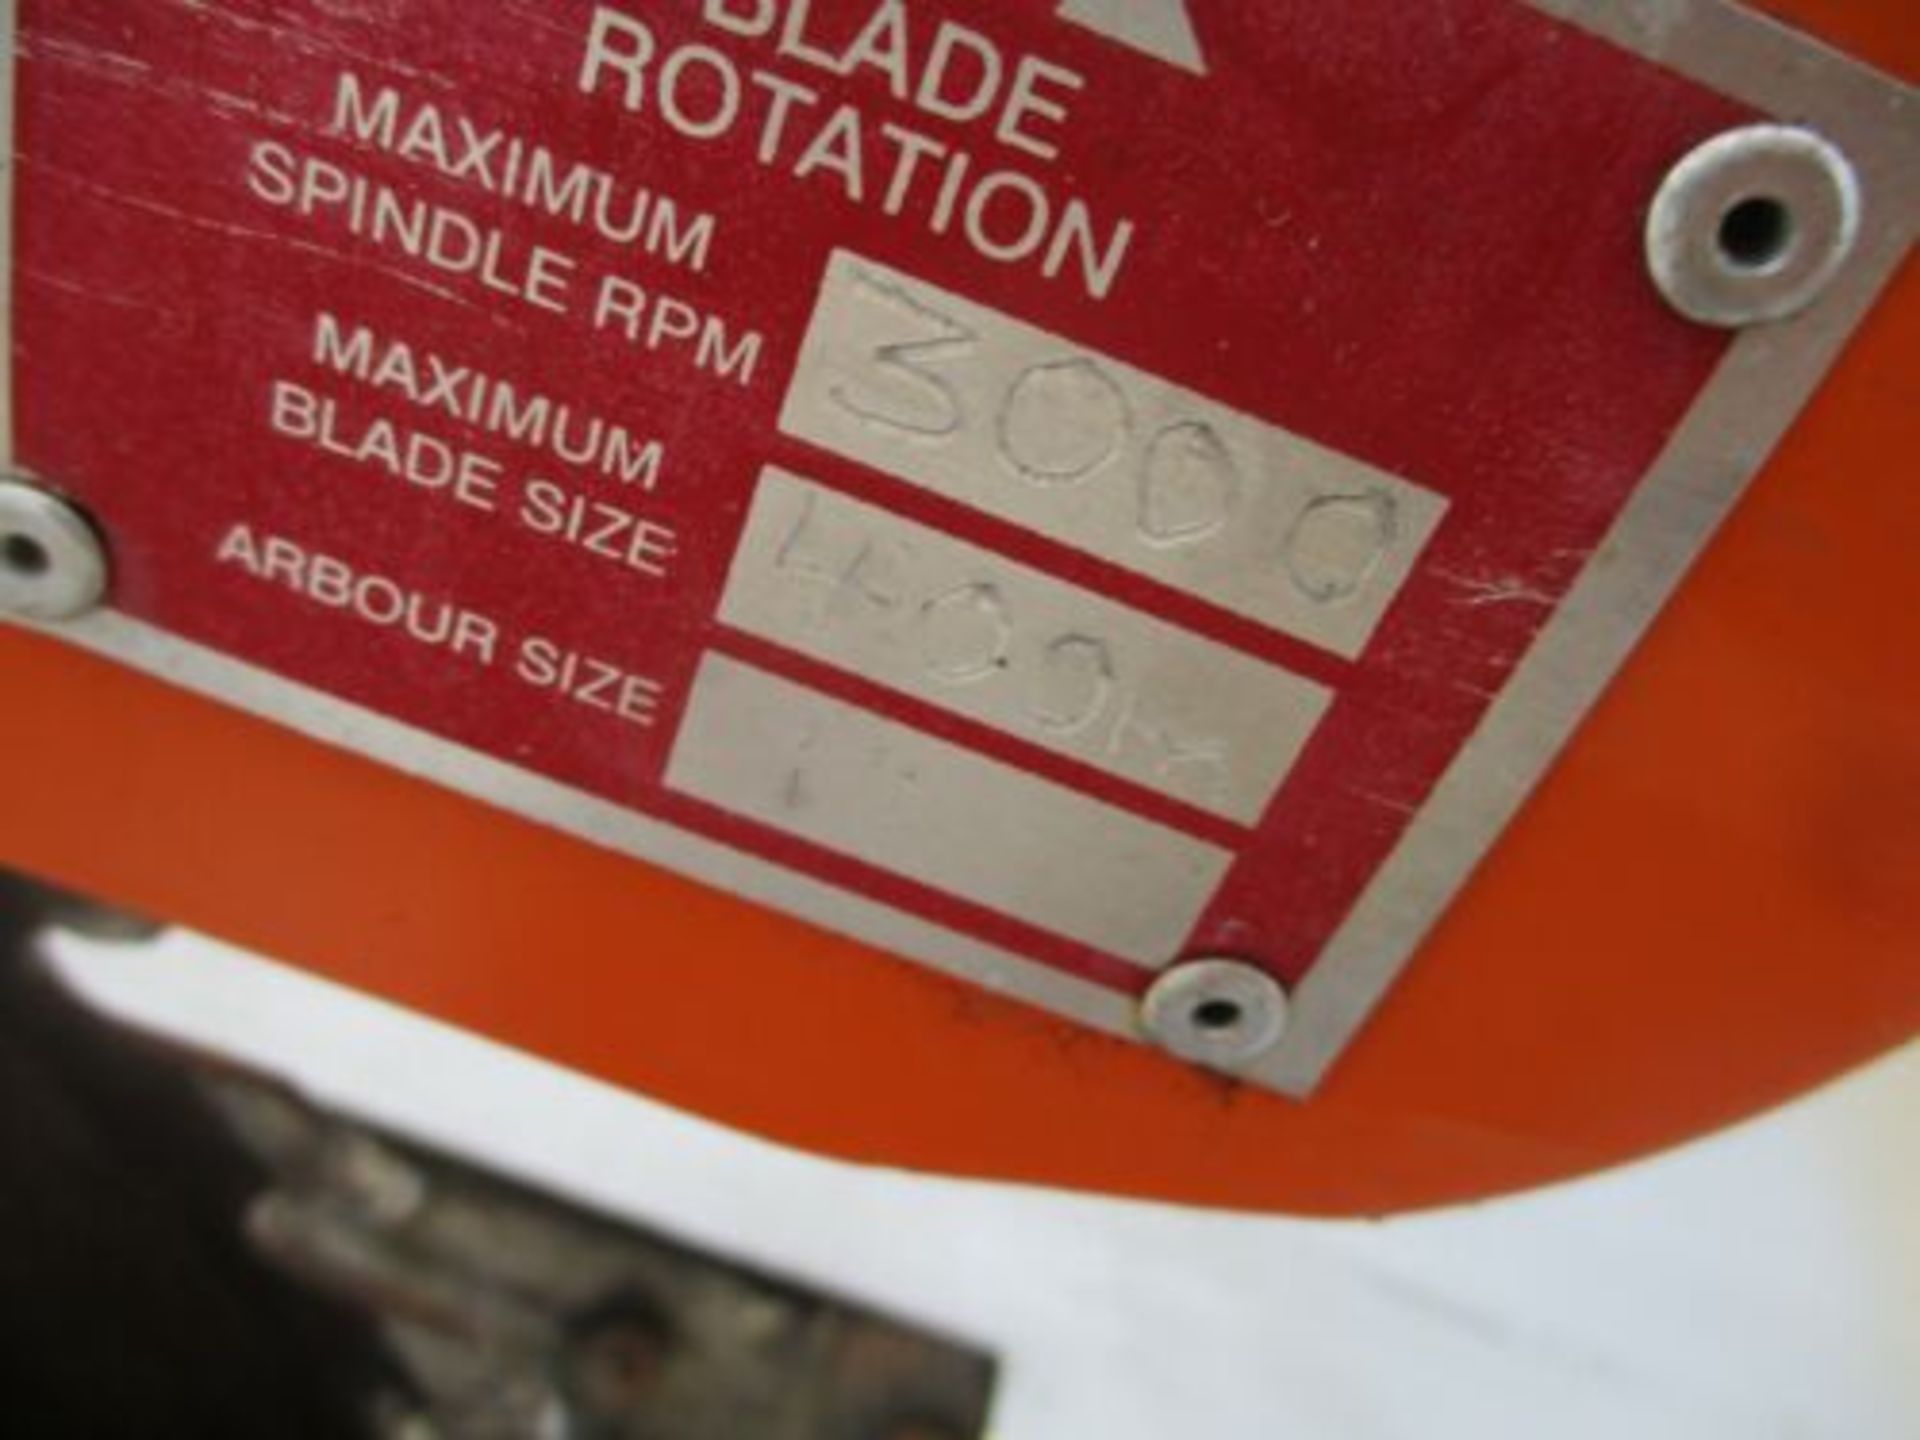 RED BAND WSA400 16" SITE WOOD SAW BENCH HONDA DIESEL ELECTRIC START DELIVERY - Image 6 of 6